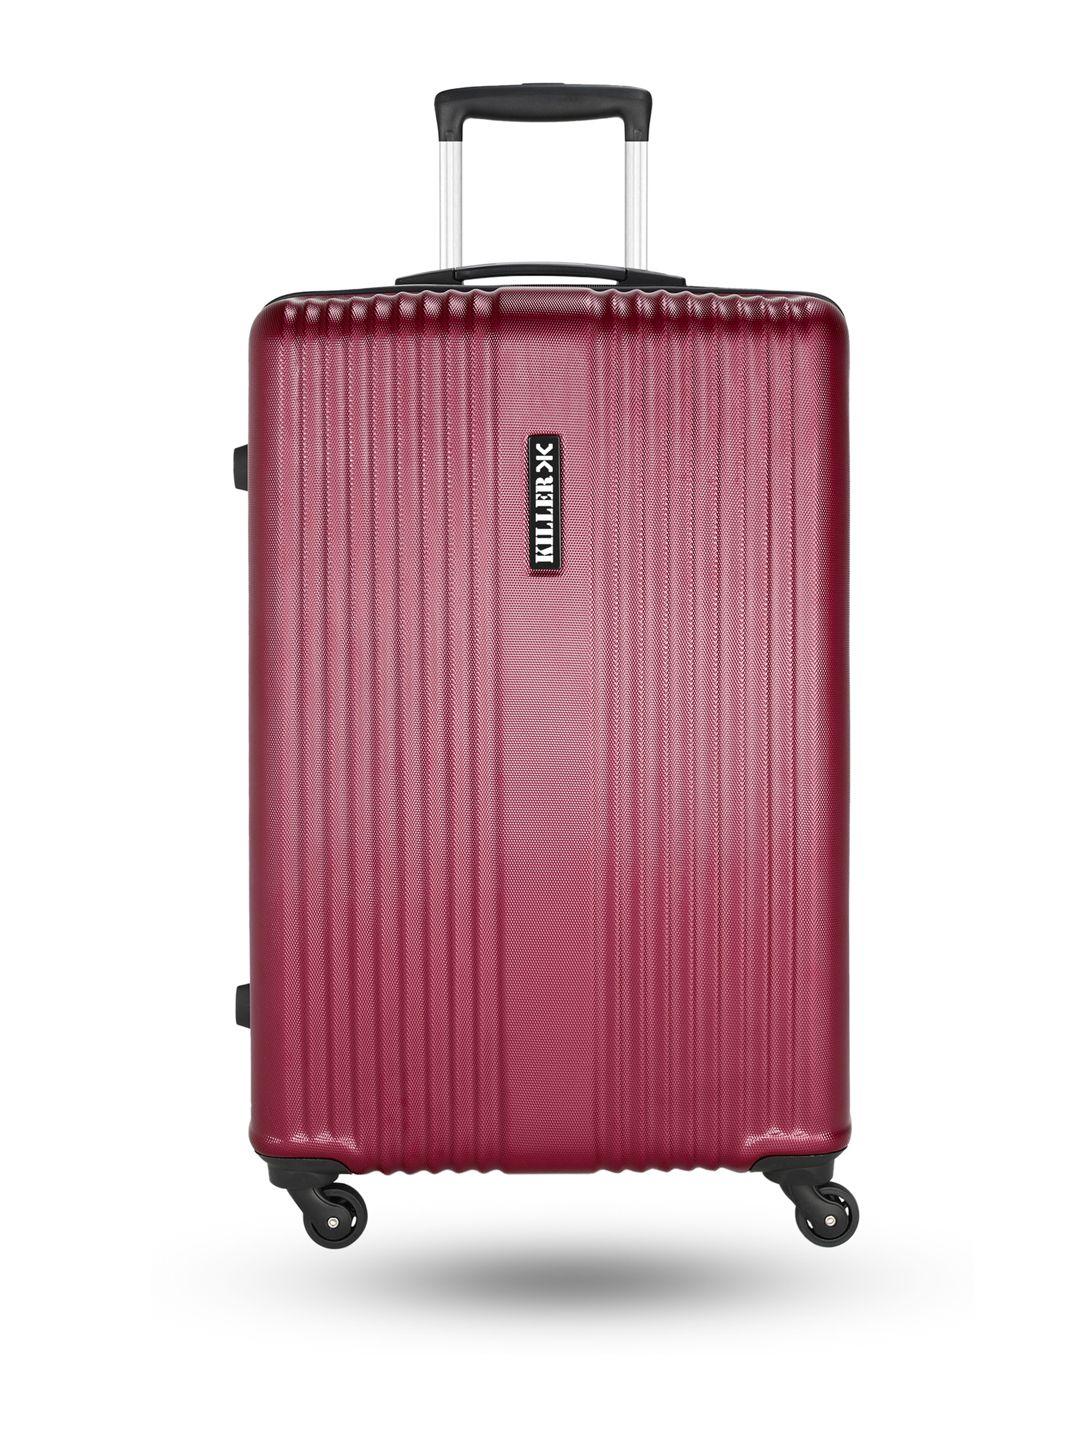 metronaut large check-in trolley suitcase